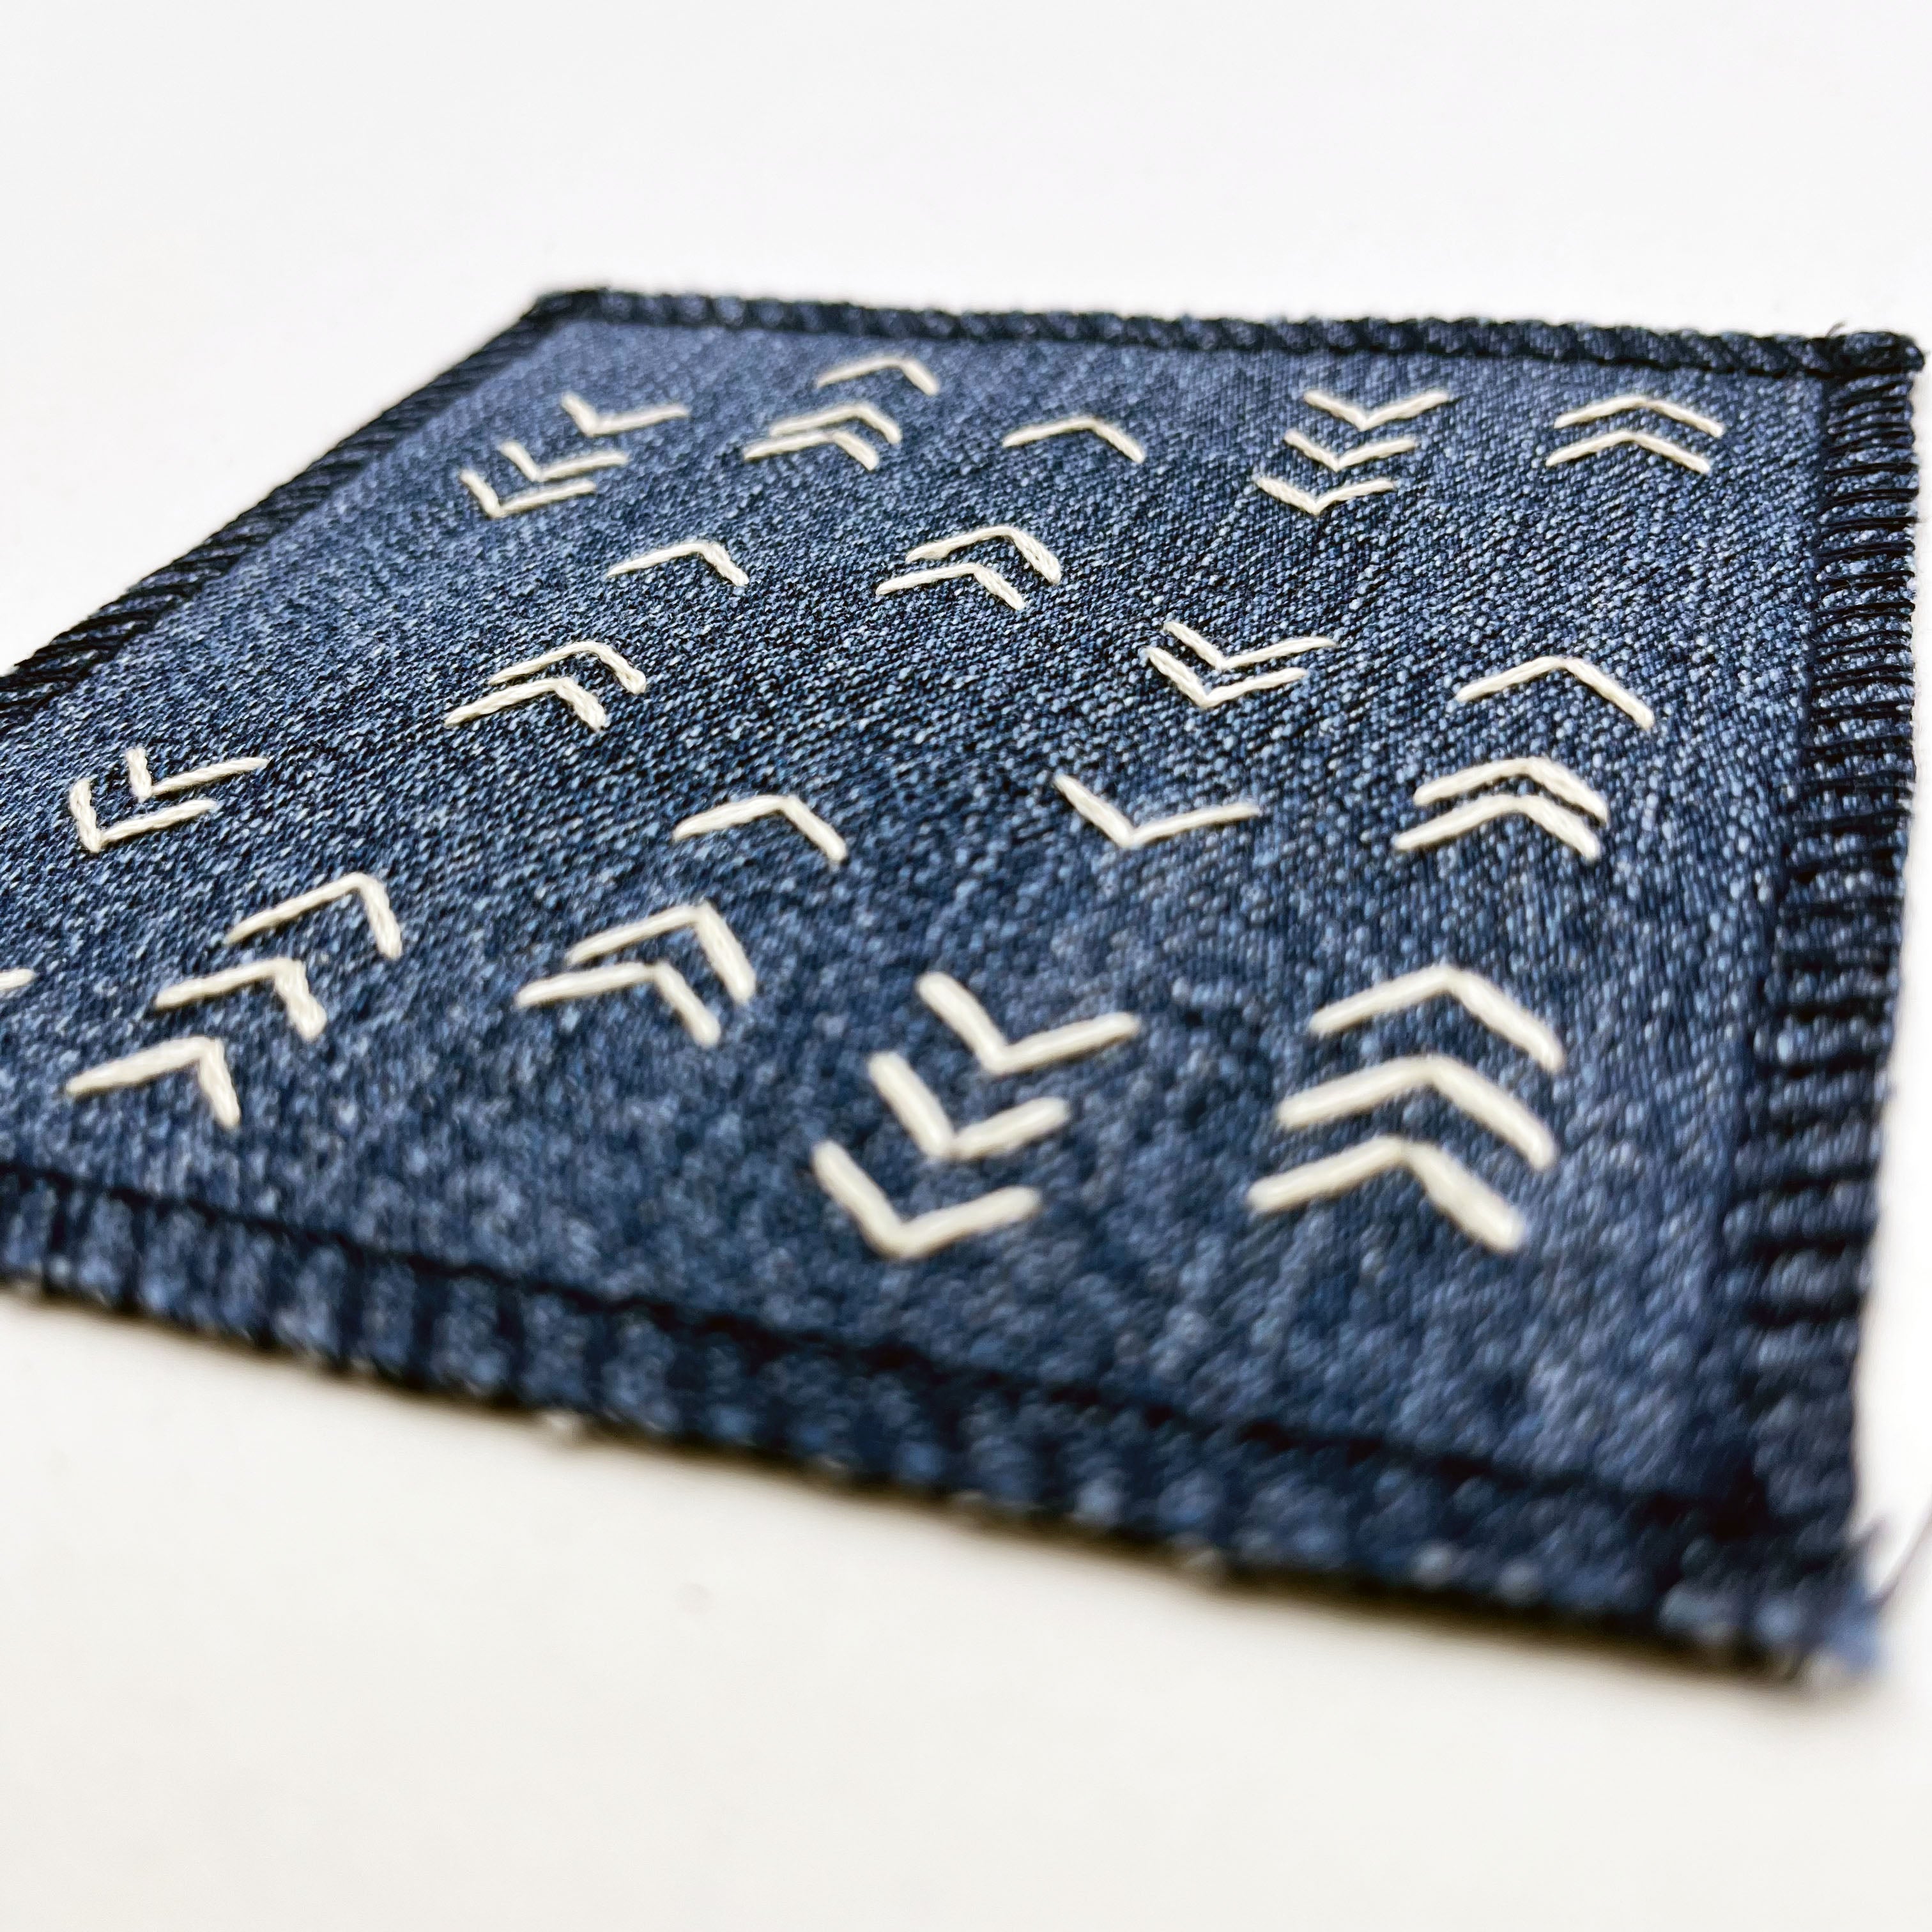 Square Patch with Embroidered Chevron Rows